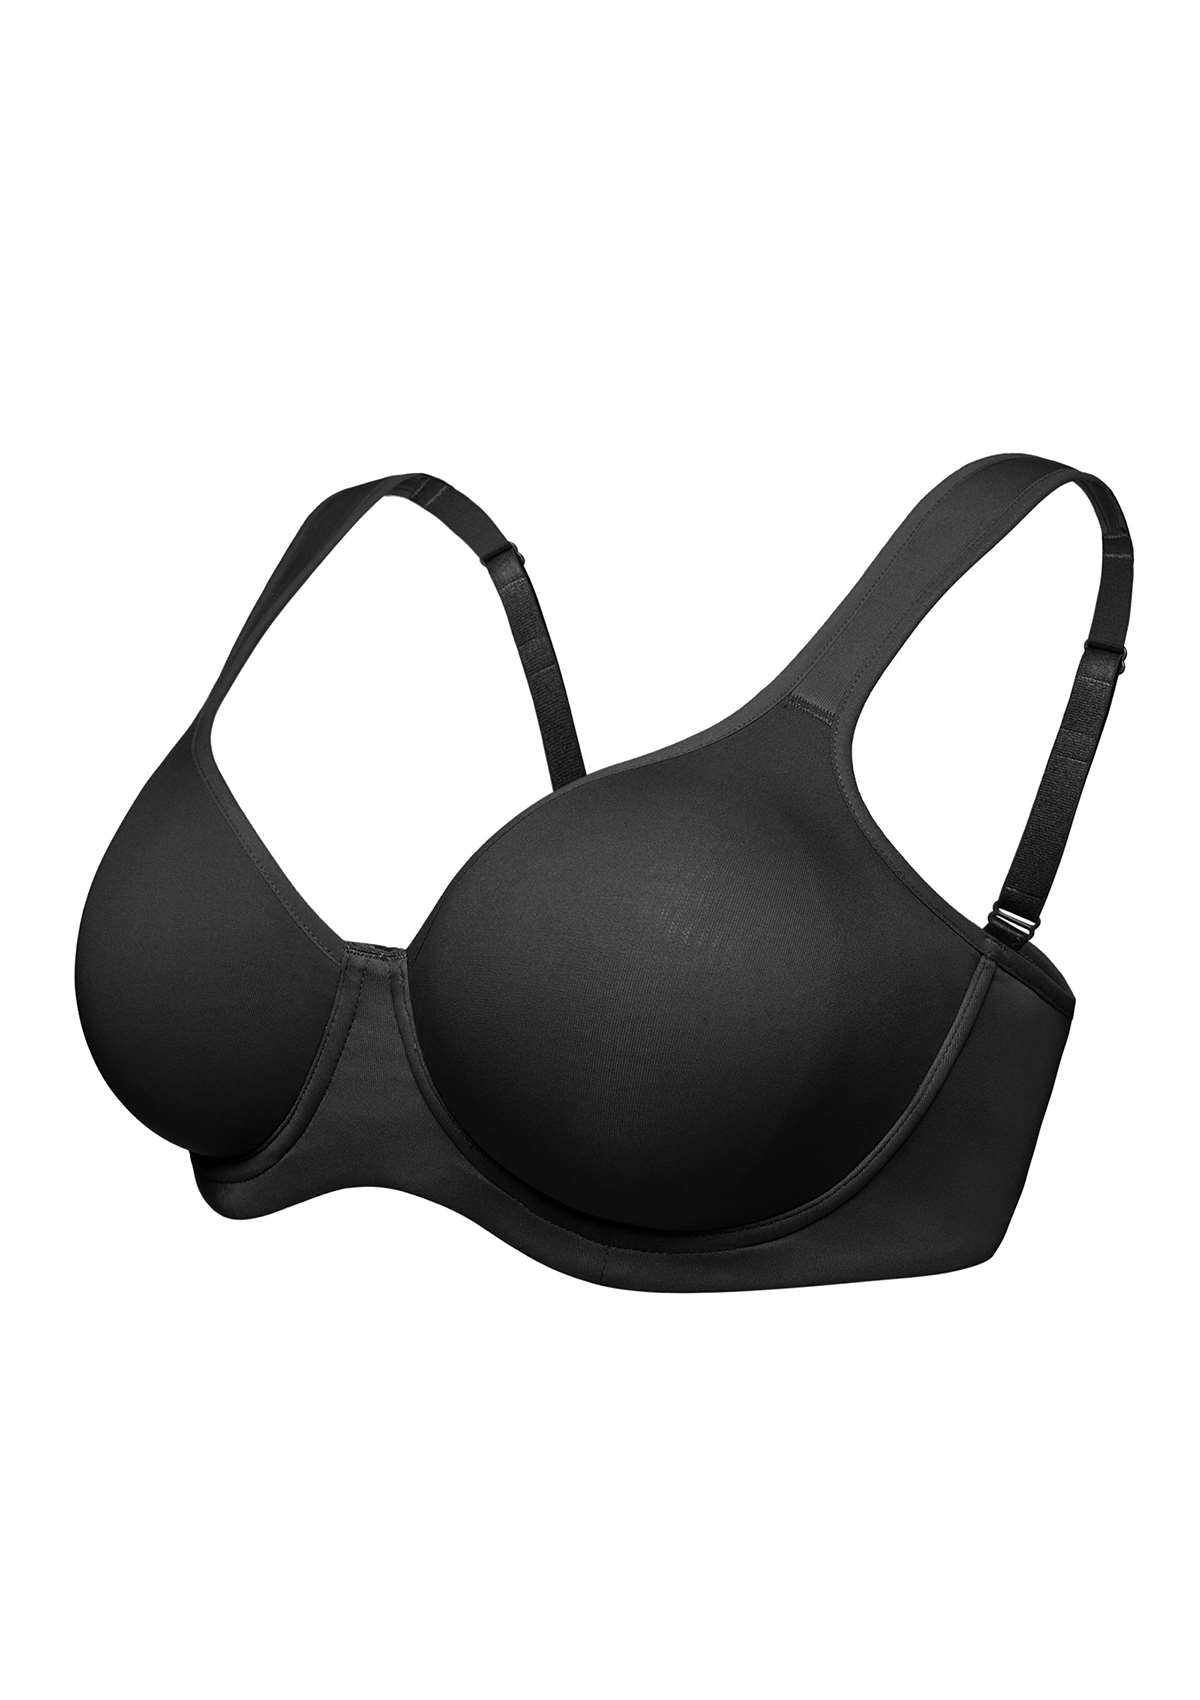 HSIA Joan Soft T-shirt Unlined Non-Padded Soft Cup Minimizer Bra - Black / 34 / C